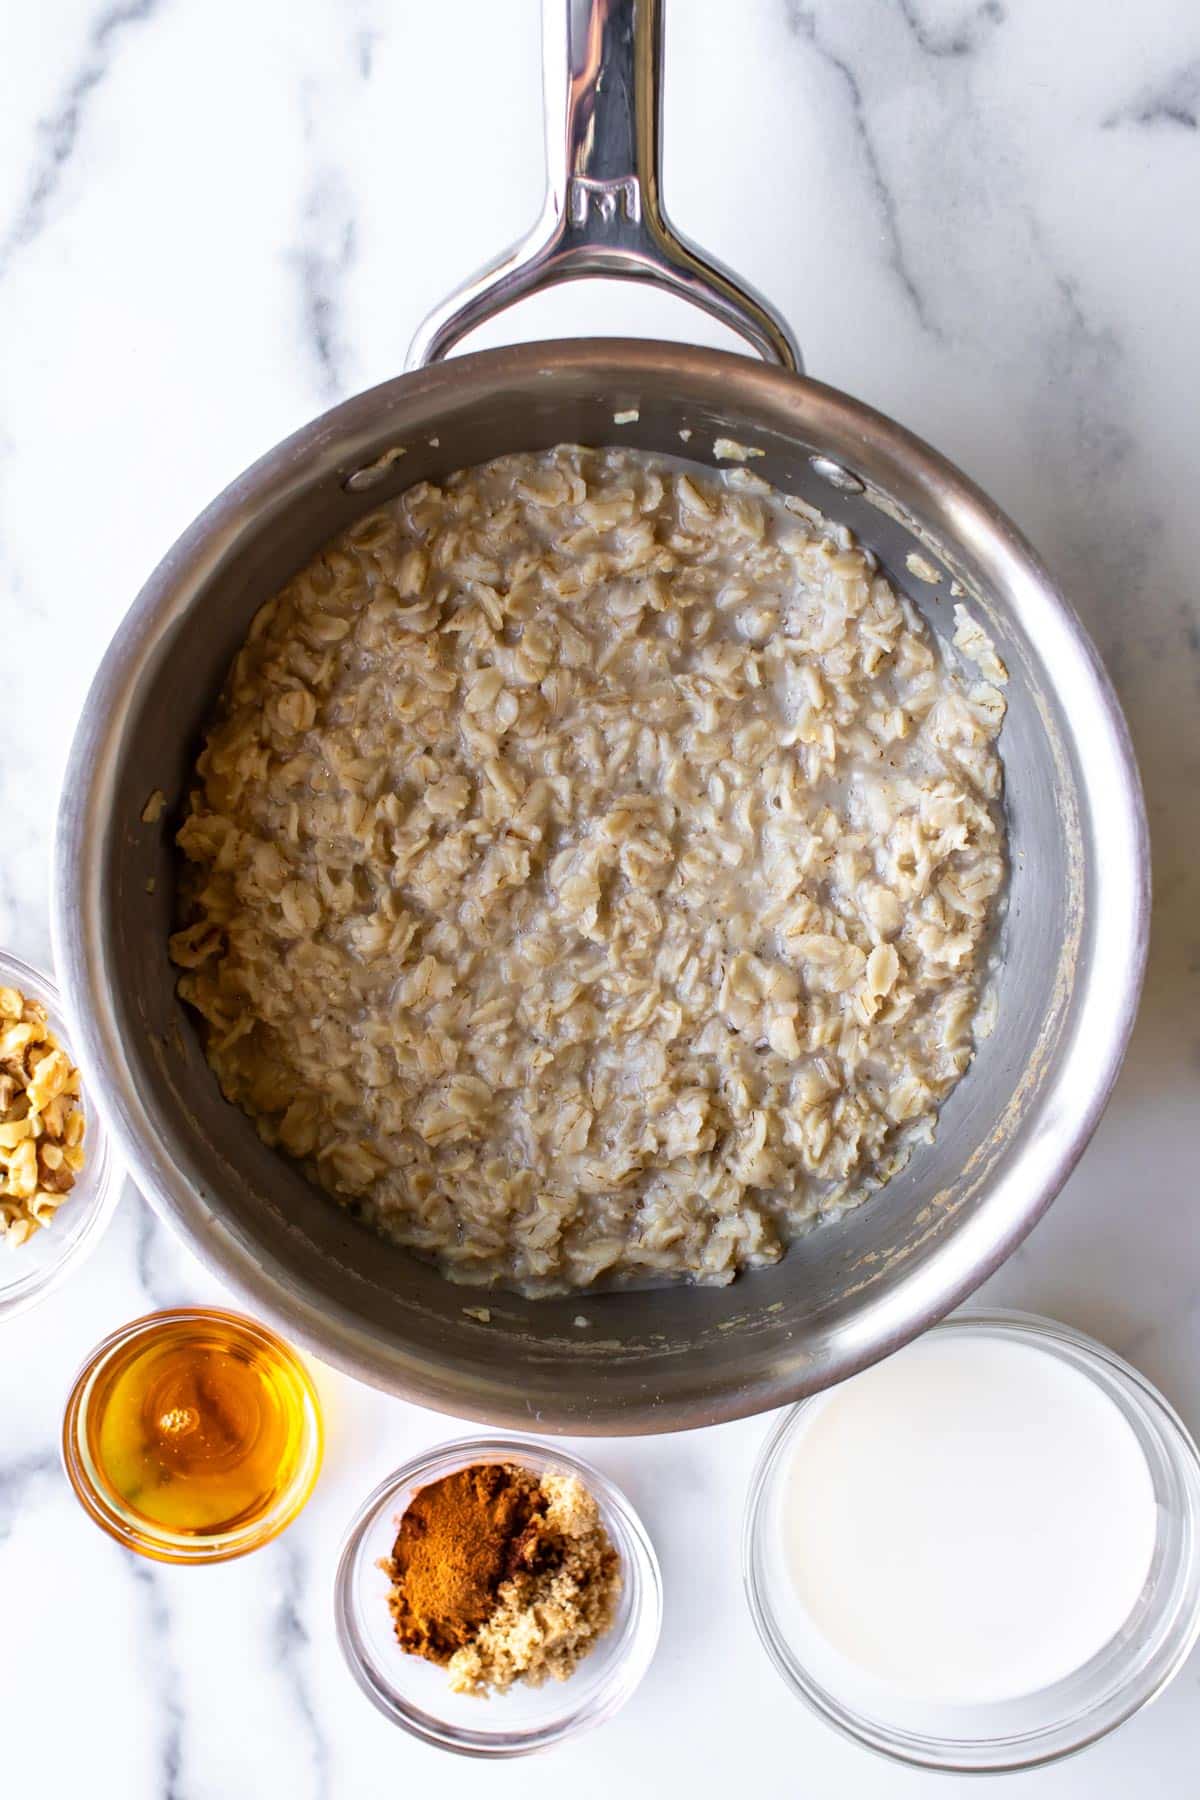 the cooked oatmeal in a pan with the milk, sugar, cinnamon, honey, and walnuts in bowls around it.